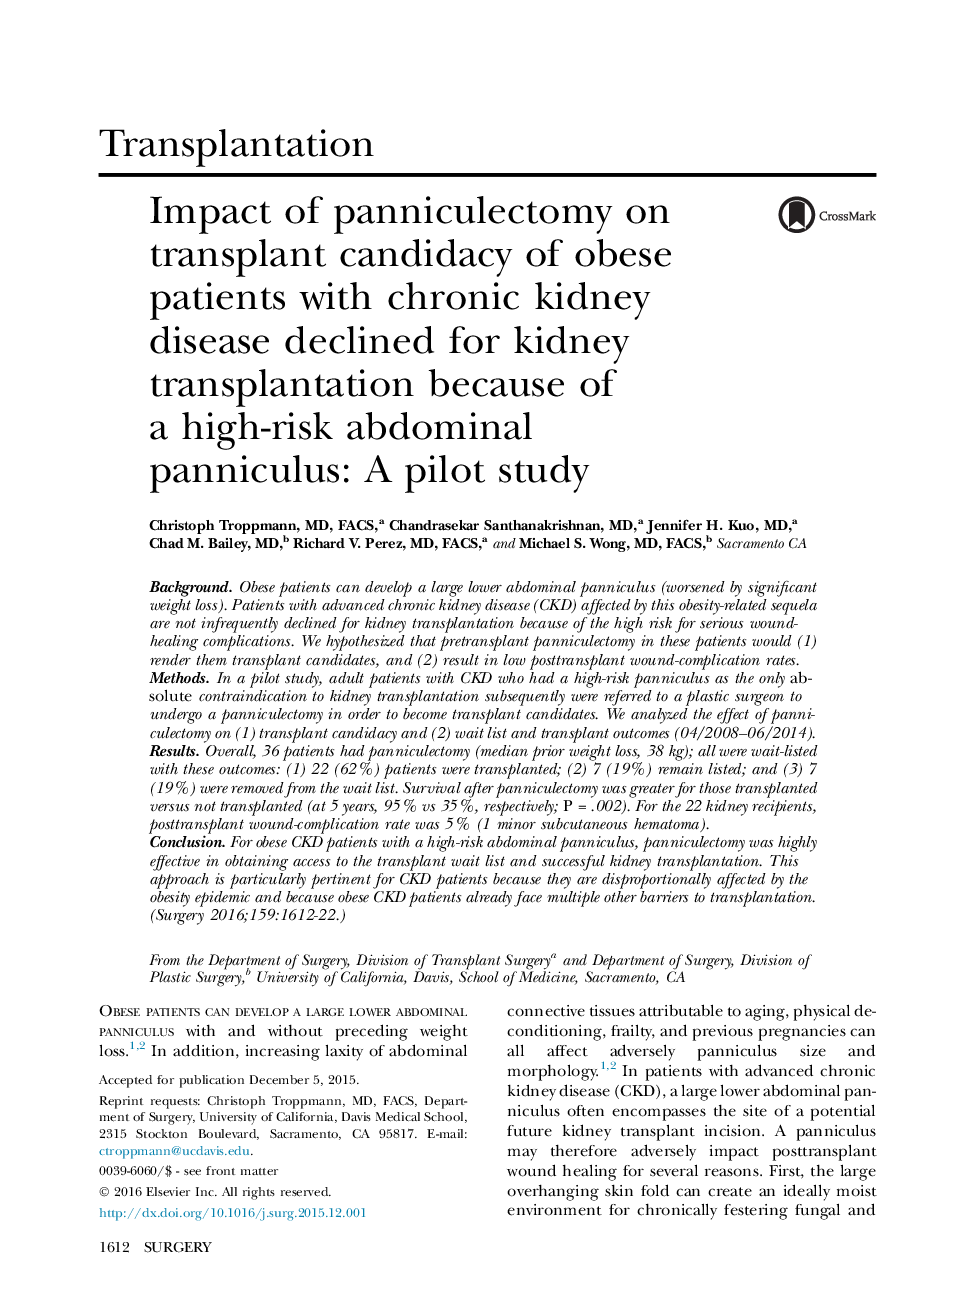 Impact of panniculectomy on transplant candidacy of obese patients with chronic kidney disease declined for kidney transplantation because of a high-risk abdominal panniculus: A pilot study